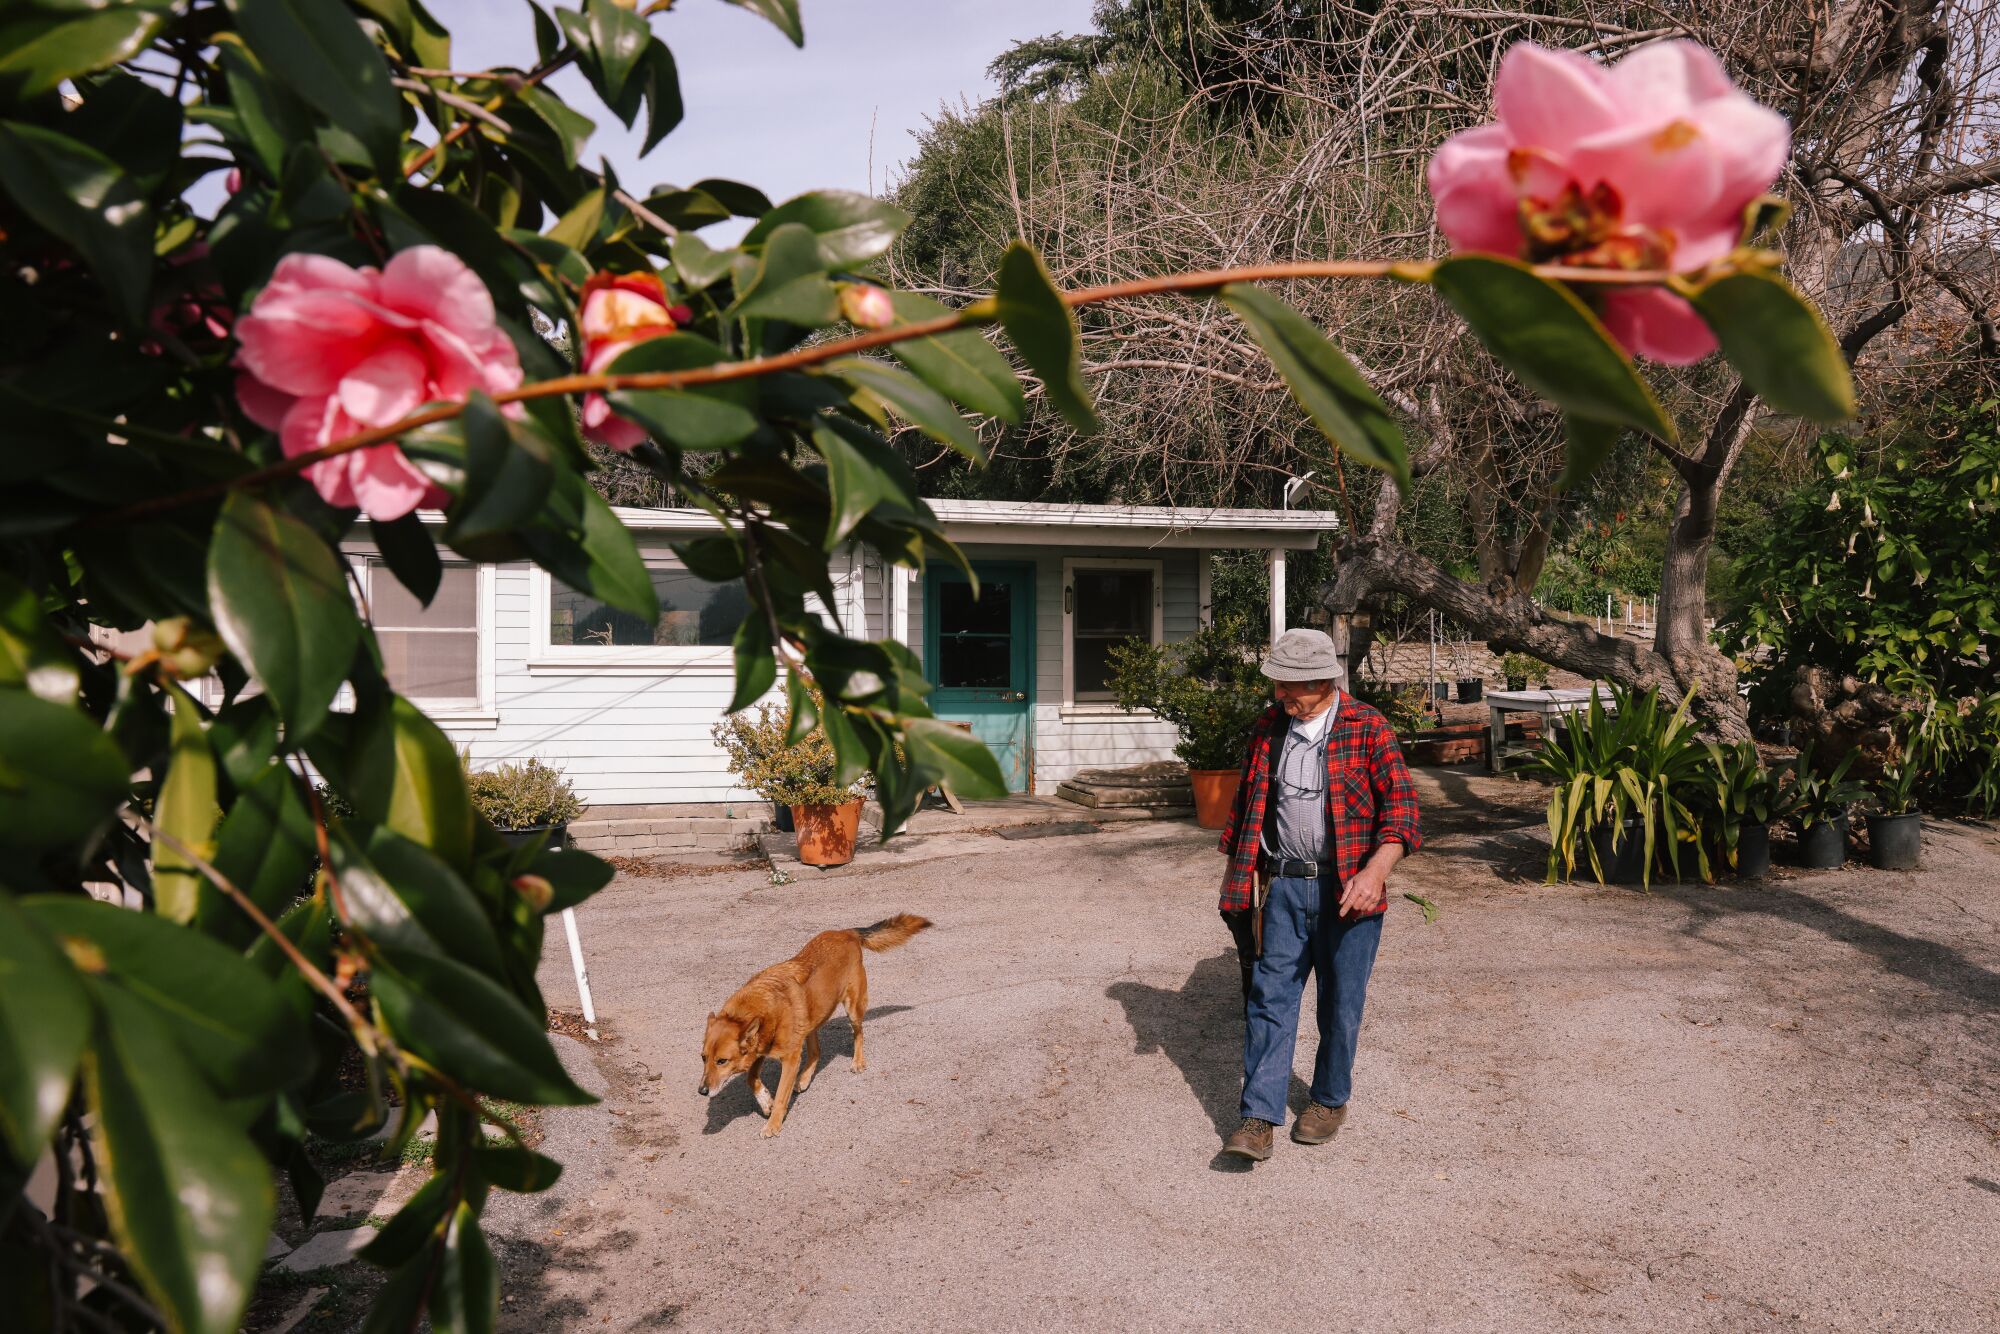 Tom Nuccio and one of his dogs, Rocket, walk from the old nursery house where he lives.